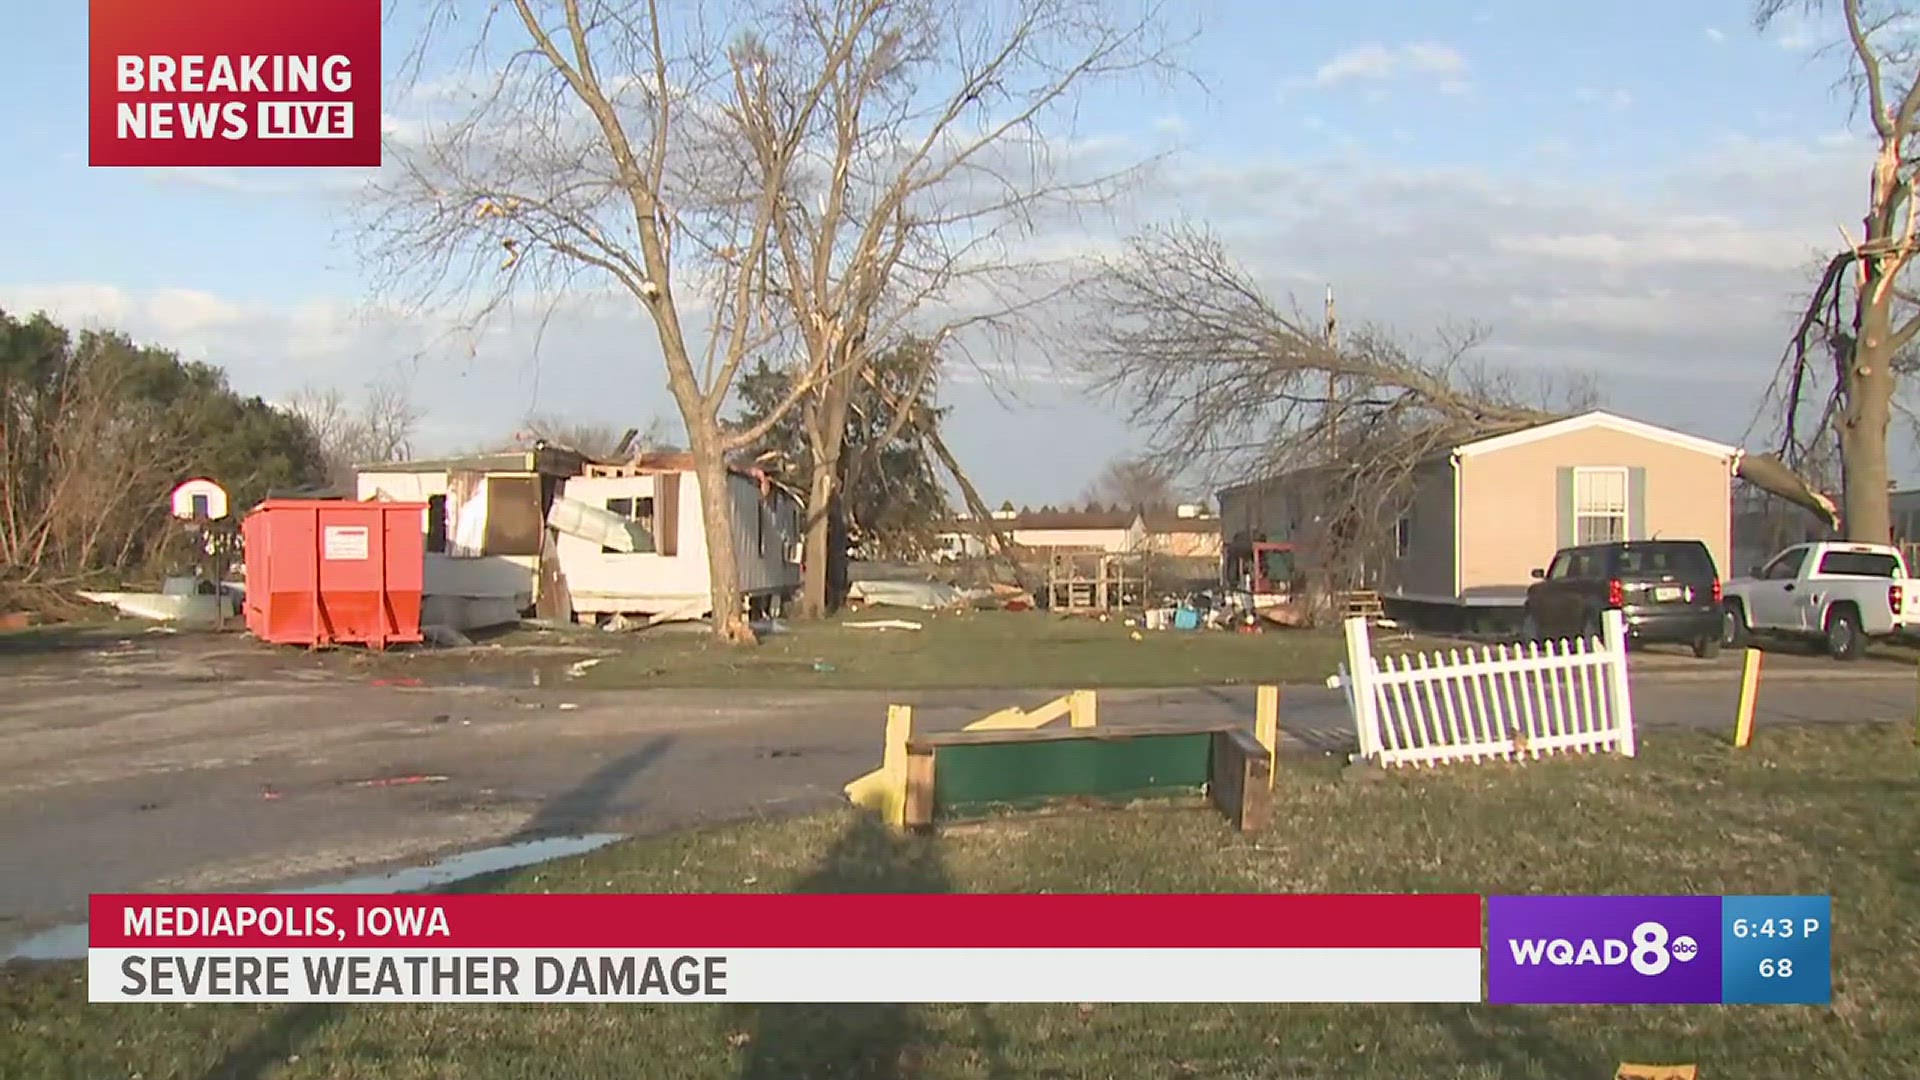 Friday's tornadoes and severe storms caused significant damage in Mediapolis, Iowa. News 8's Joe McCoy shared the story of one woman whose roof was torn away.